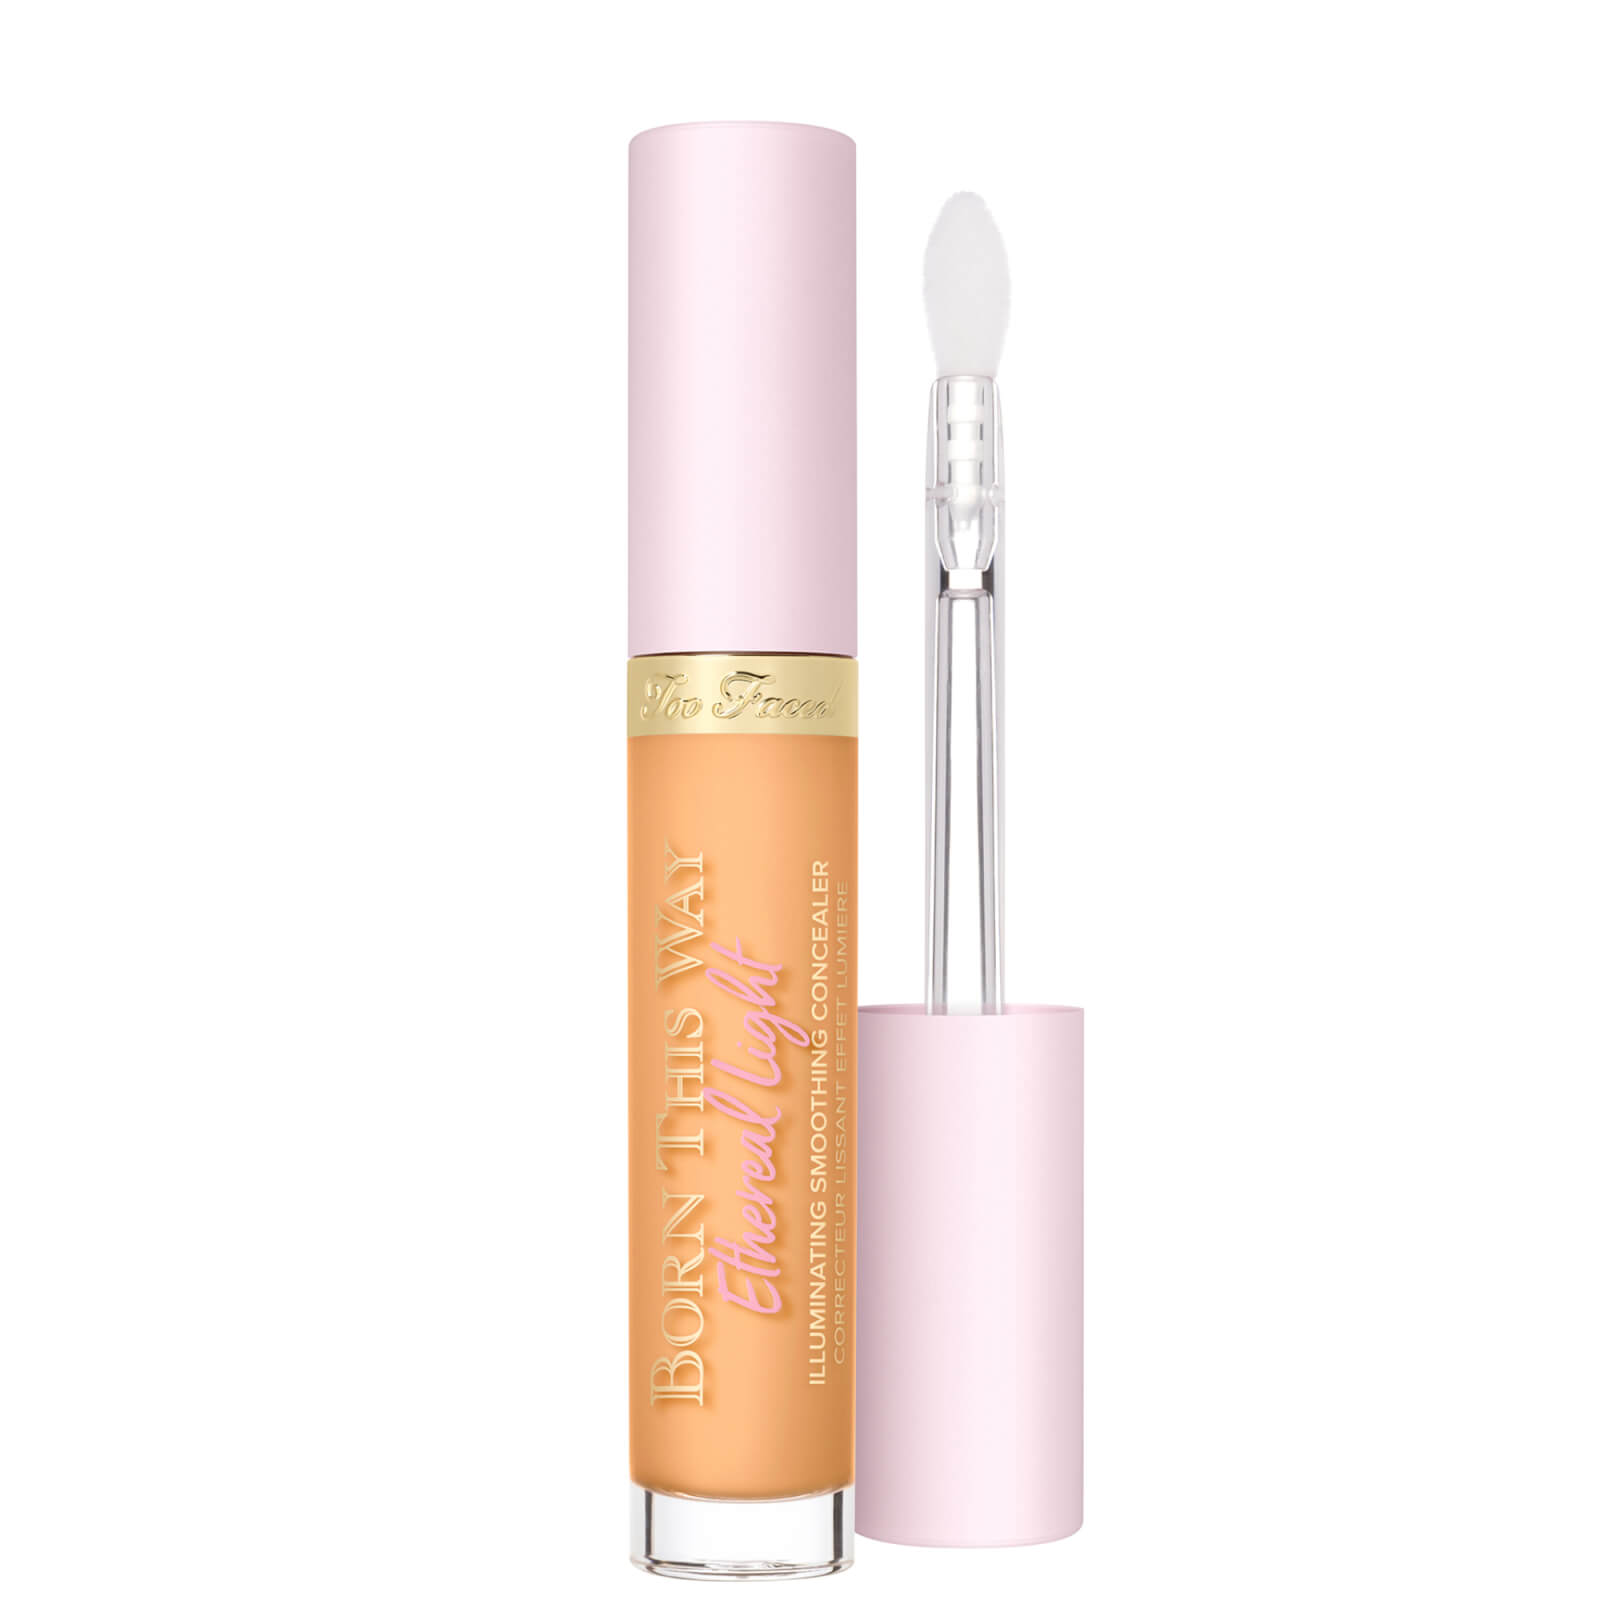 Too Faced Born This Way Ethereal Light Illuminating Smoothing Concealer 15ml (Various Shades) - Bisc